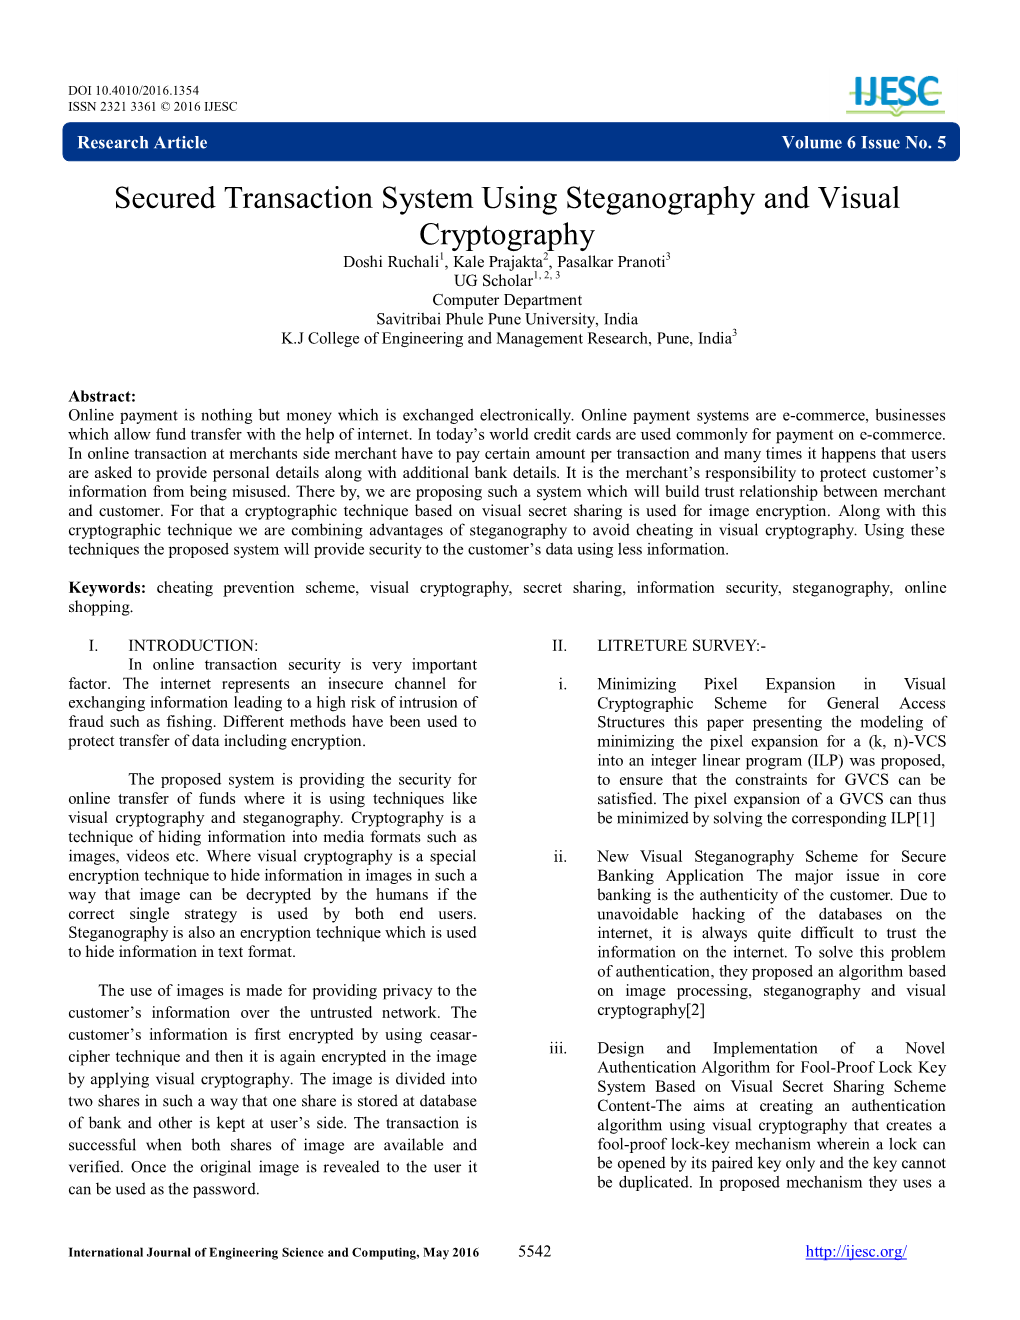 Secured Transaction System Using Steganography and Visual Cryptography